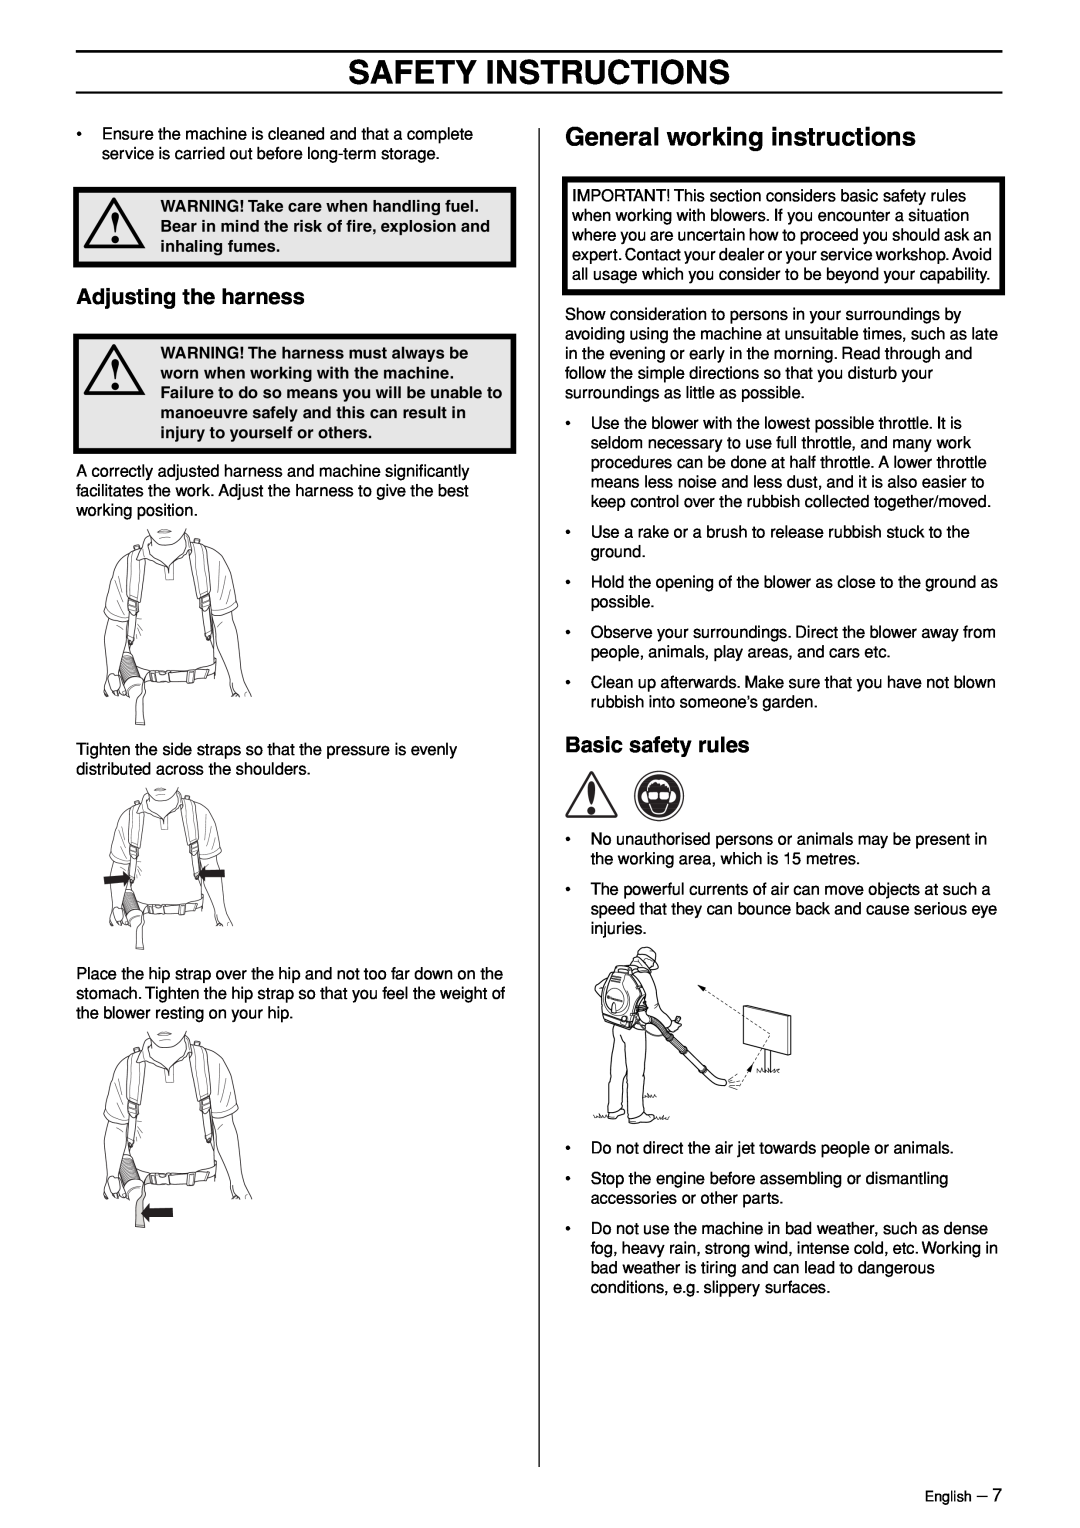 Husqvarna 356BT manual General working instructions, Adjusting the harness, Basic safety rules, Safety Instructions 